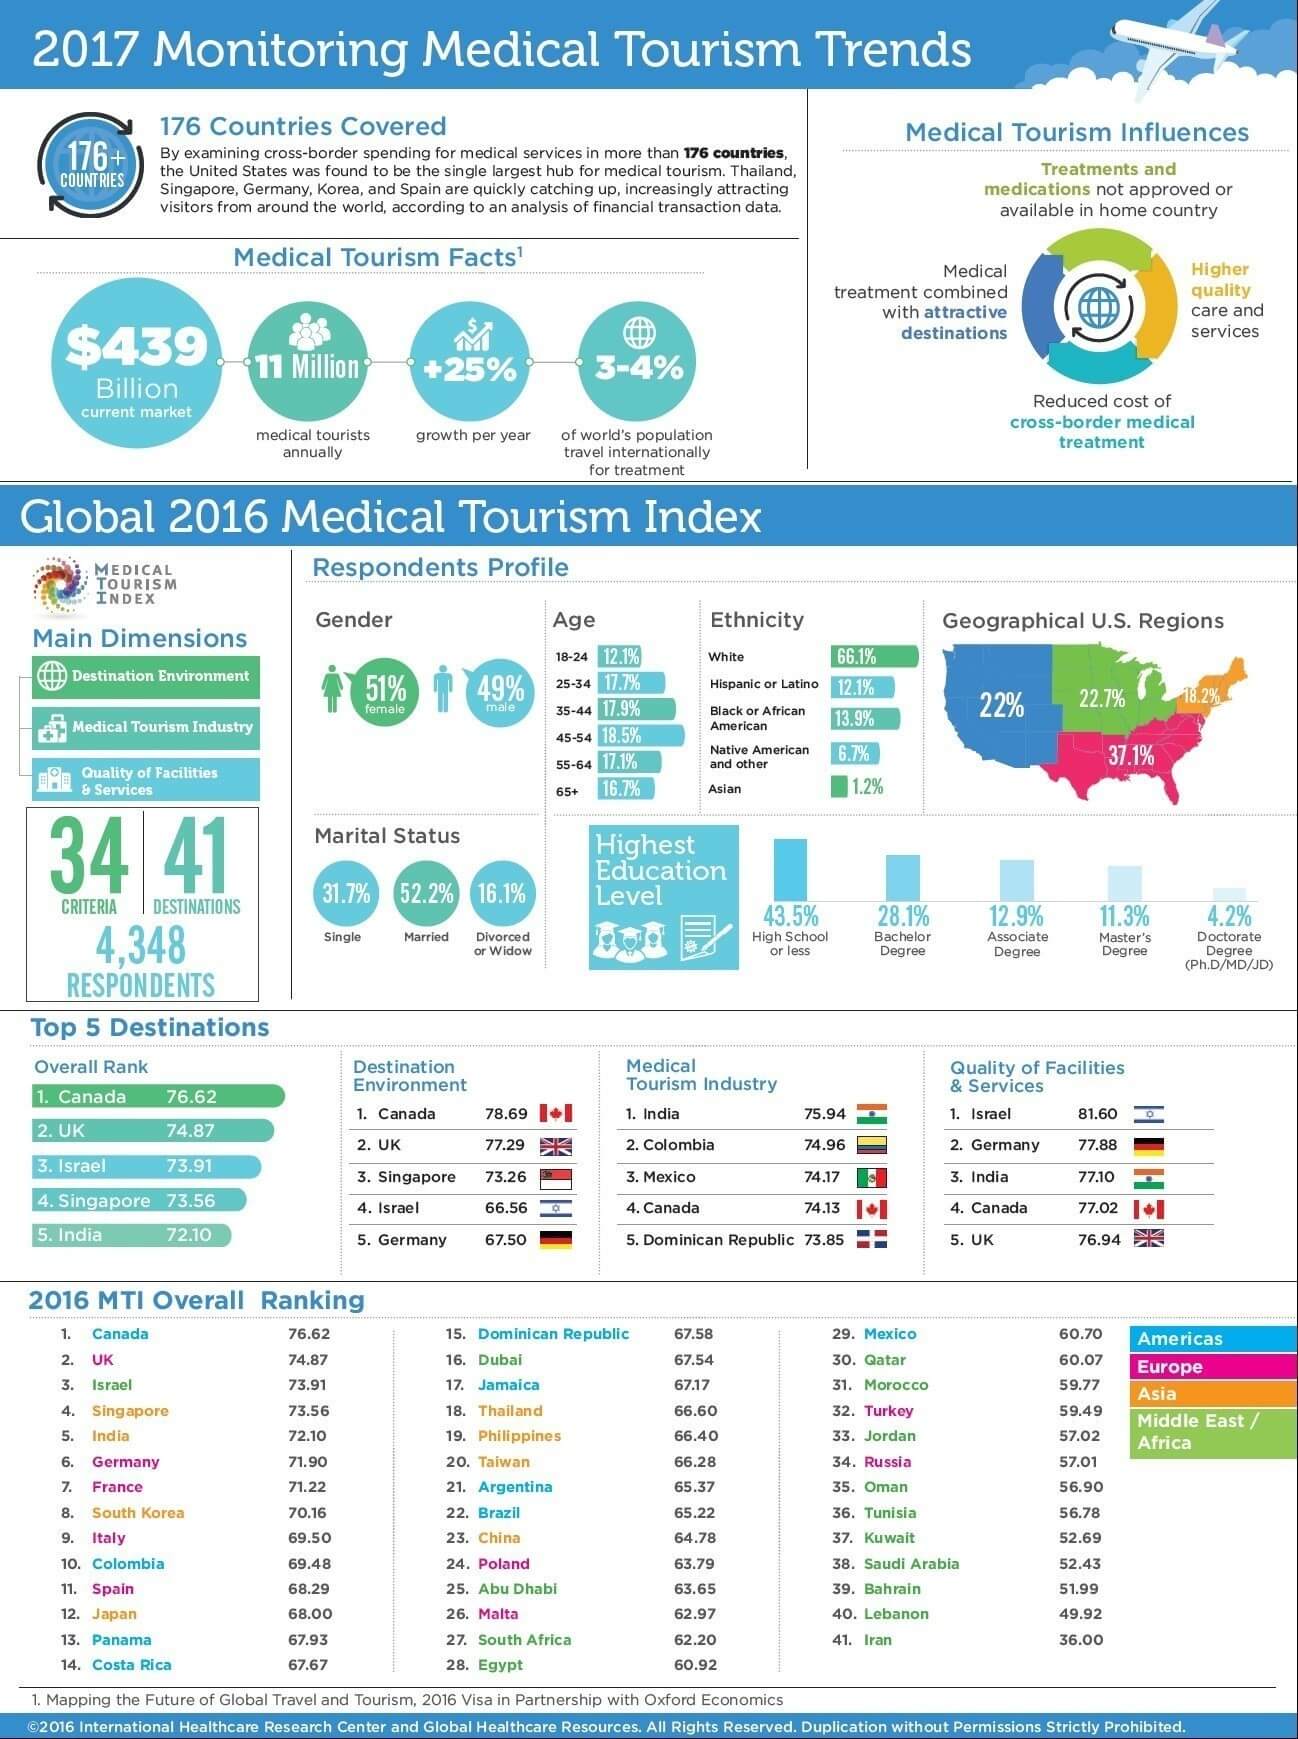 facts about medical tourism